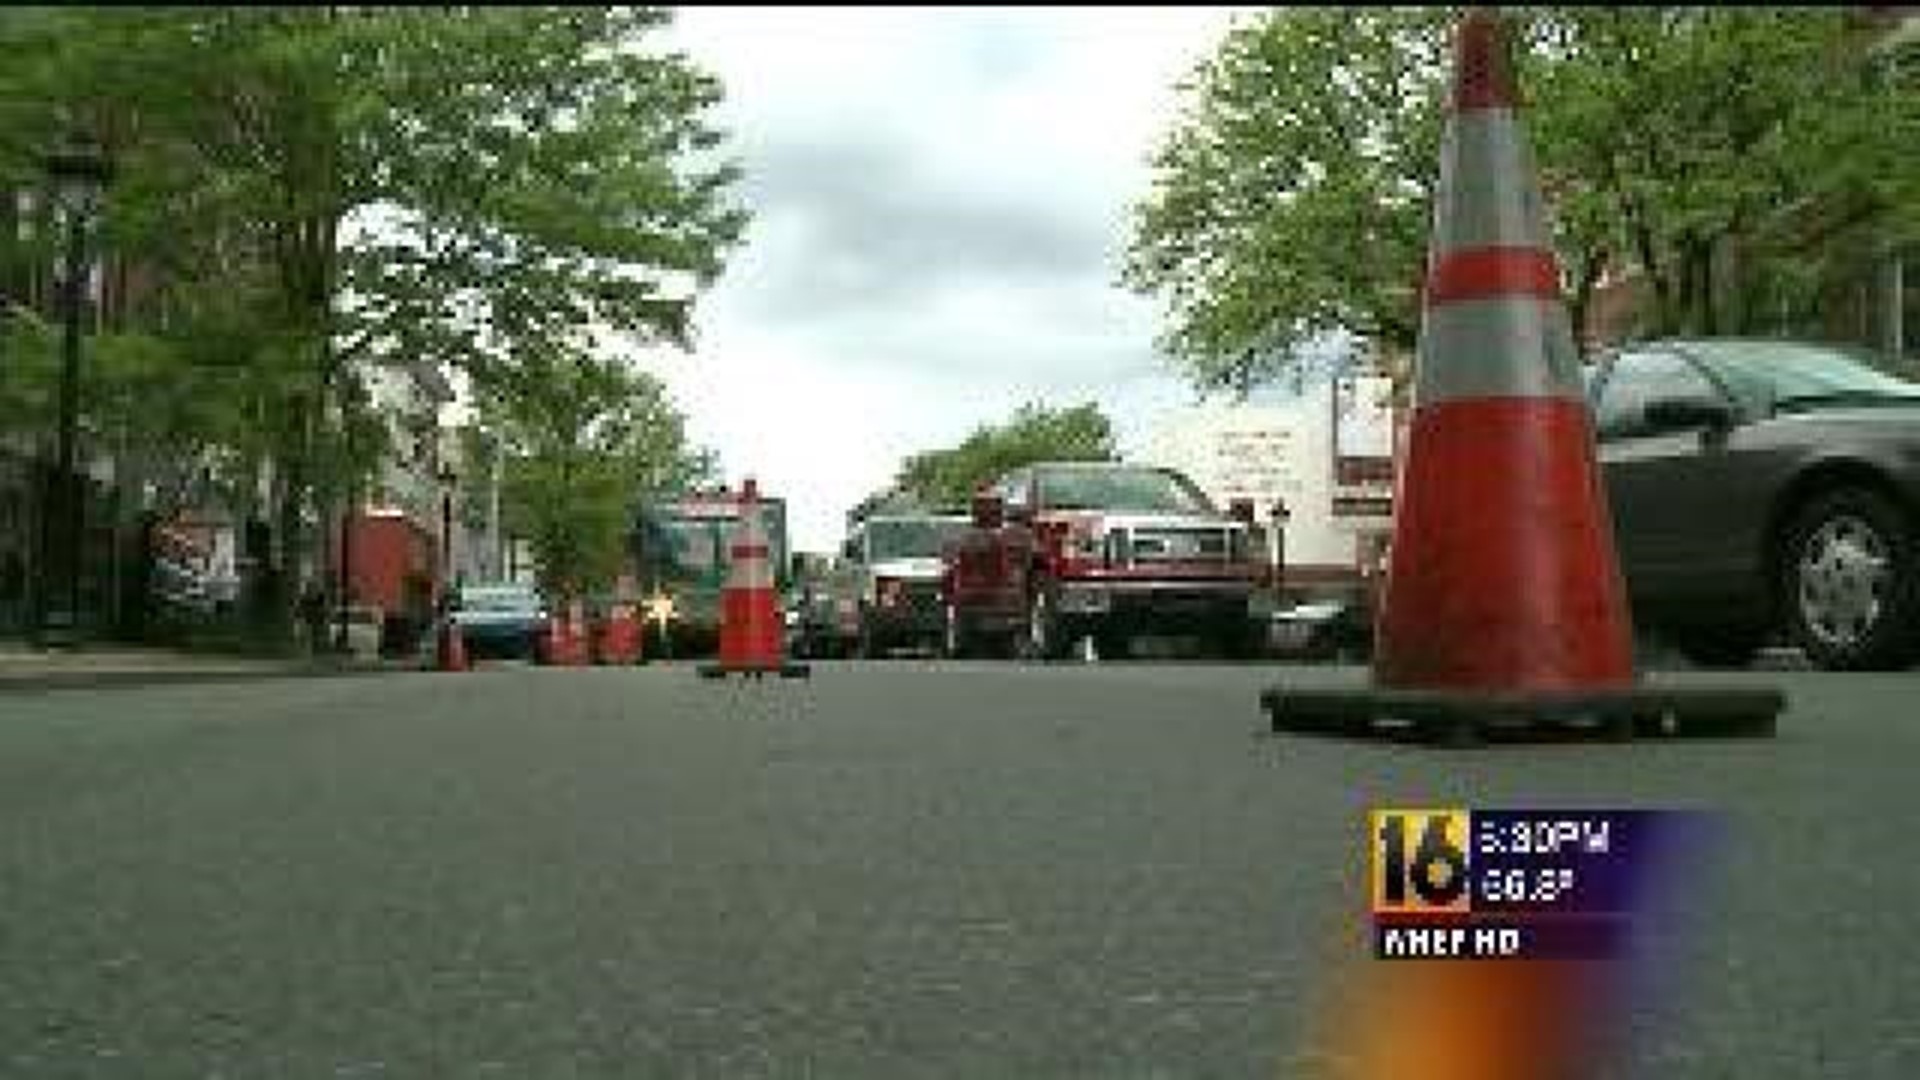 Gas Line Project Causing Backup in Stroudsburg